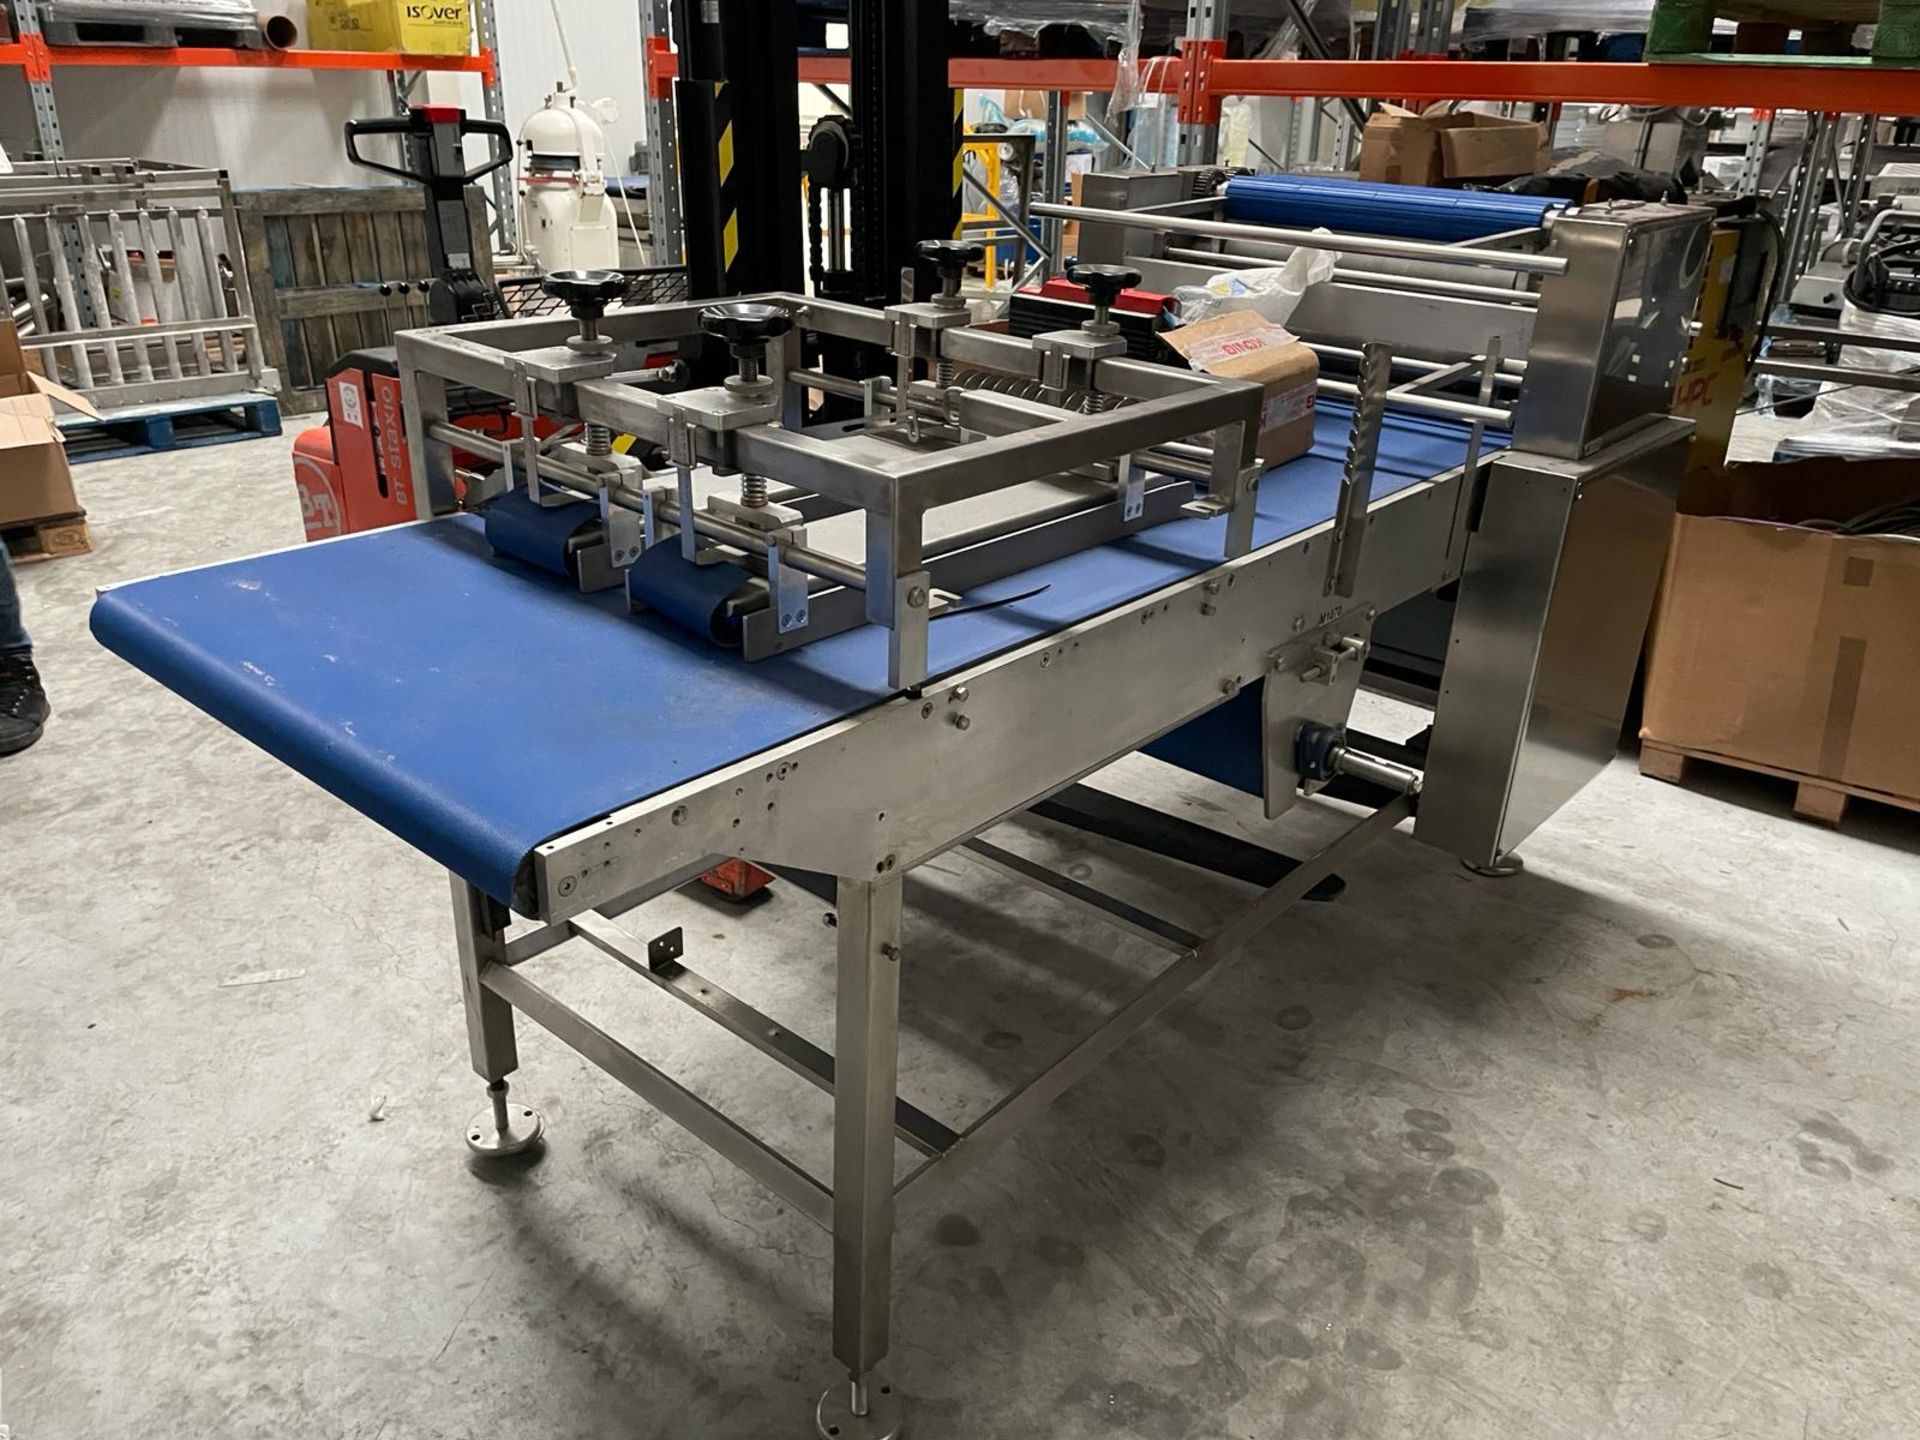 Stainless steel twin lane conveyor system used for a sheeting section on a line, incomplete, parts - Bild 5 aus 10